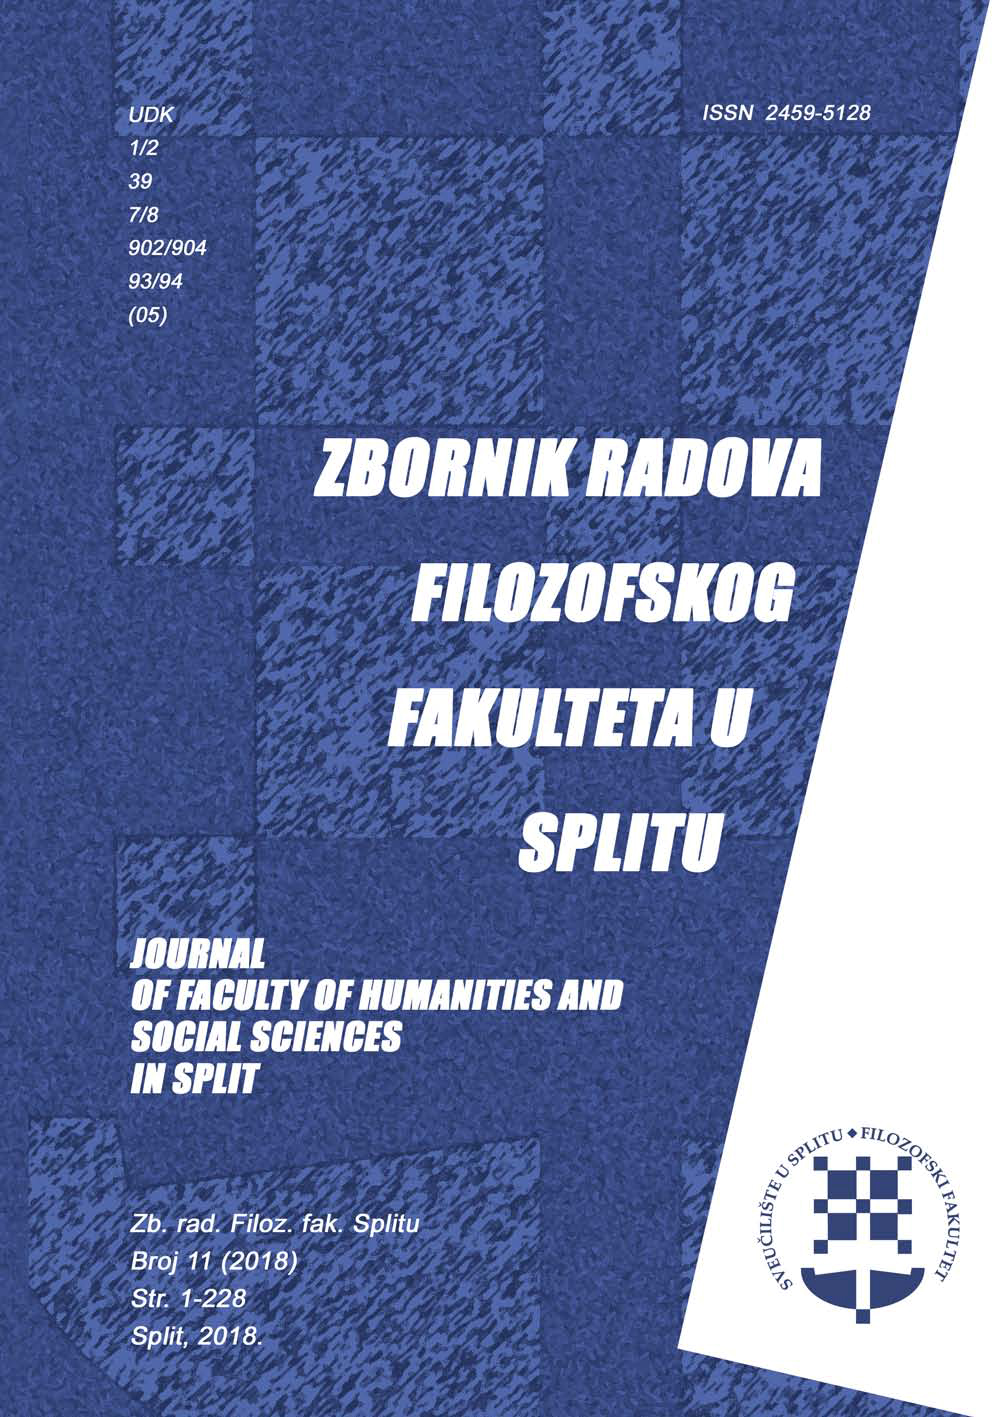 Journal of Faculty of Humanities and Social Sciences in Split